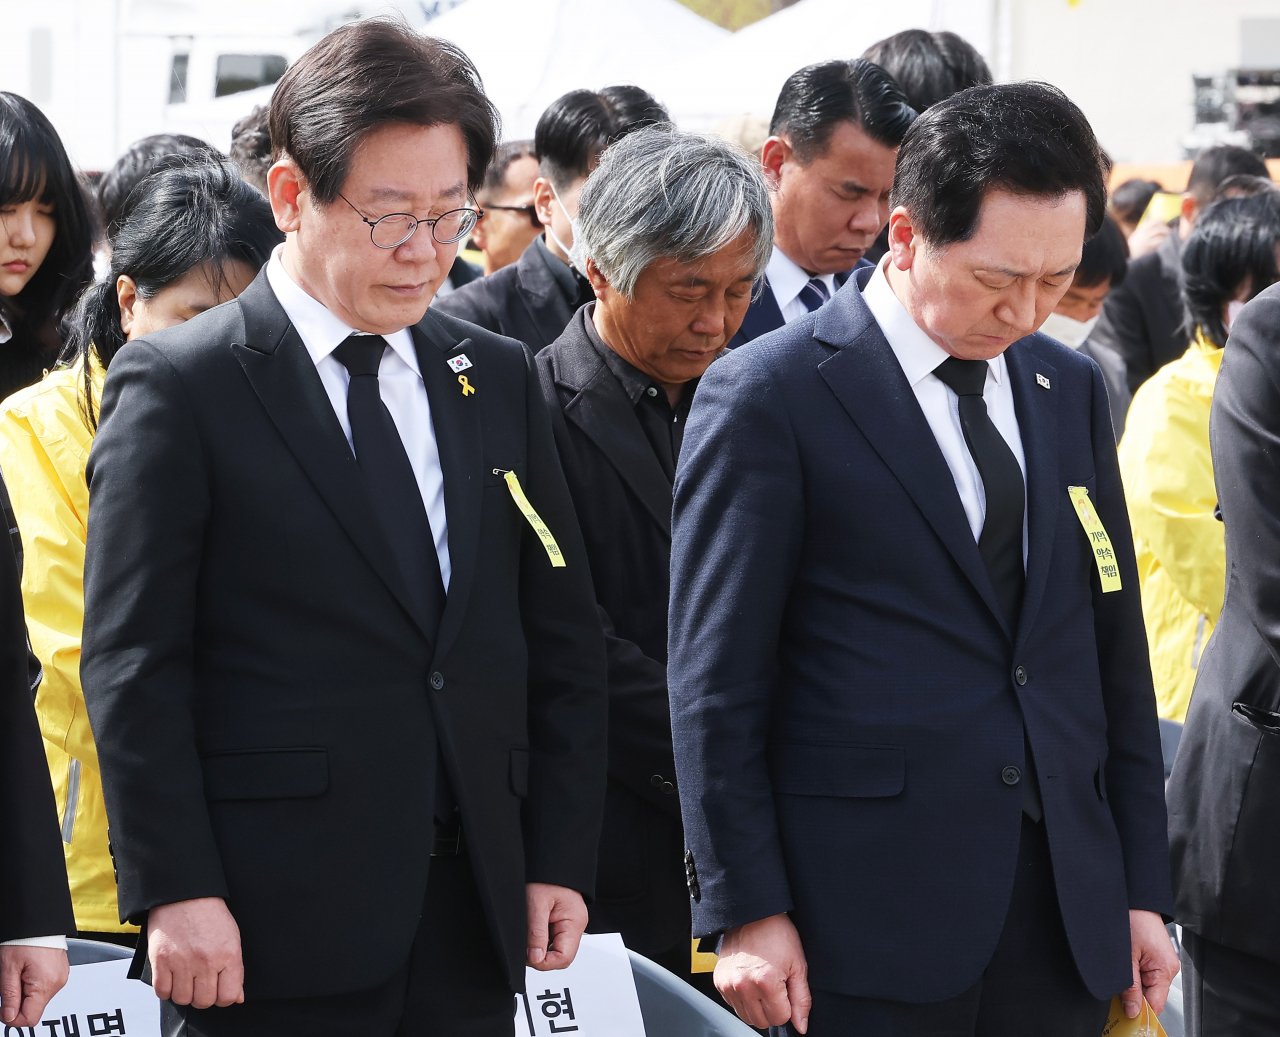 Democratic Party of Korea chair Rep. Lee Jae-myung and People Power Party chair Rep. Kim Gi-hyeon attend the remembrance ceremony on Sunday. (Yonhap)